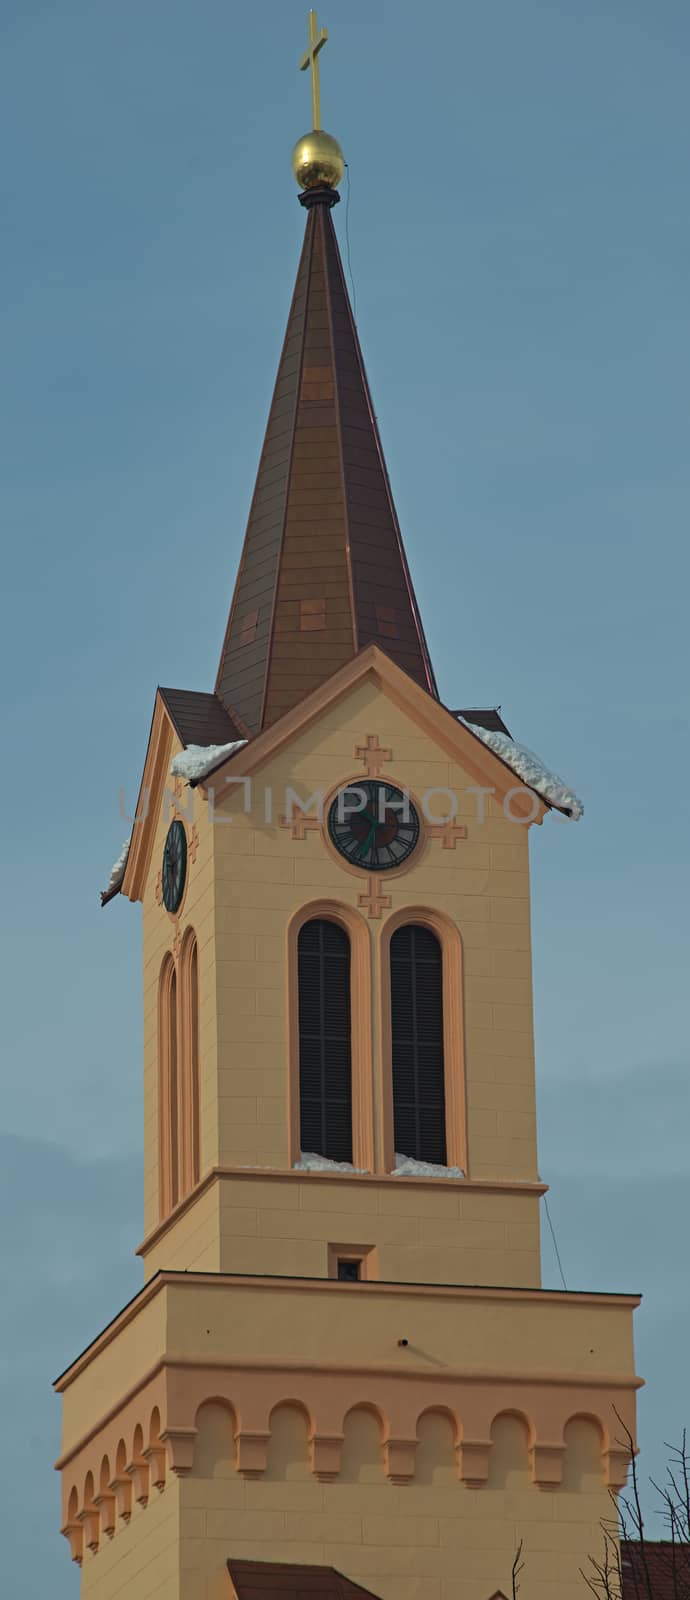 Fully reconstructed orange orthodox church bell tower